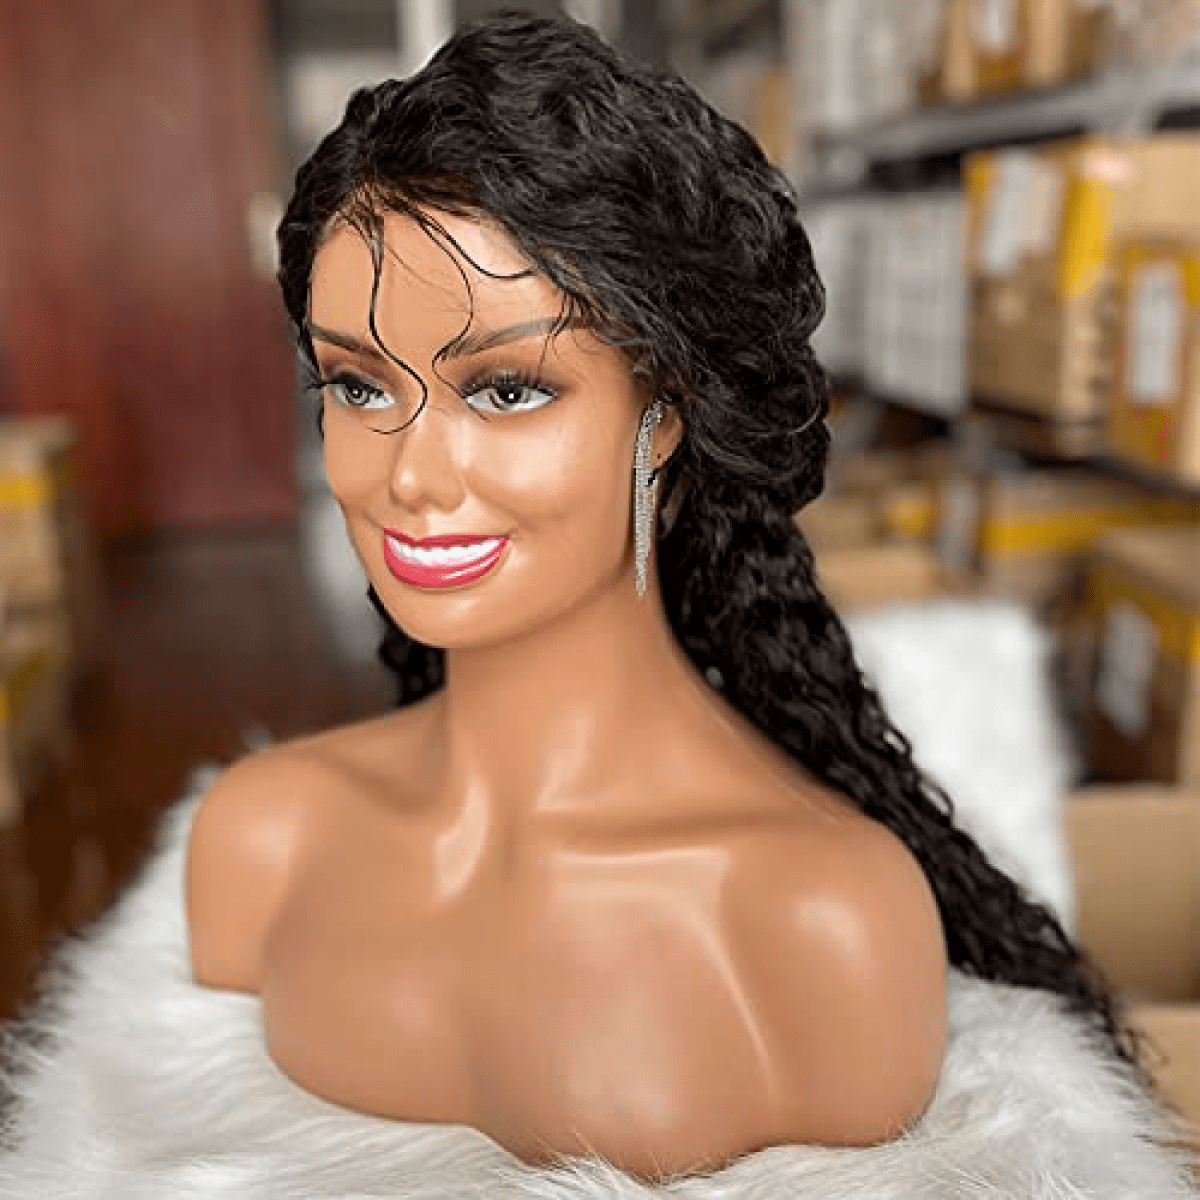 Female Mannequin Head with Shoulders - Used